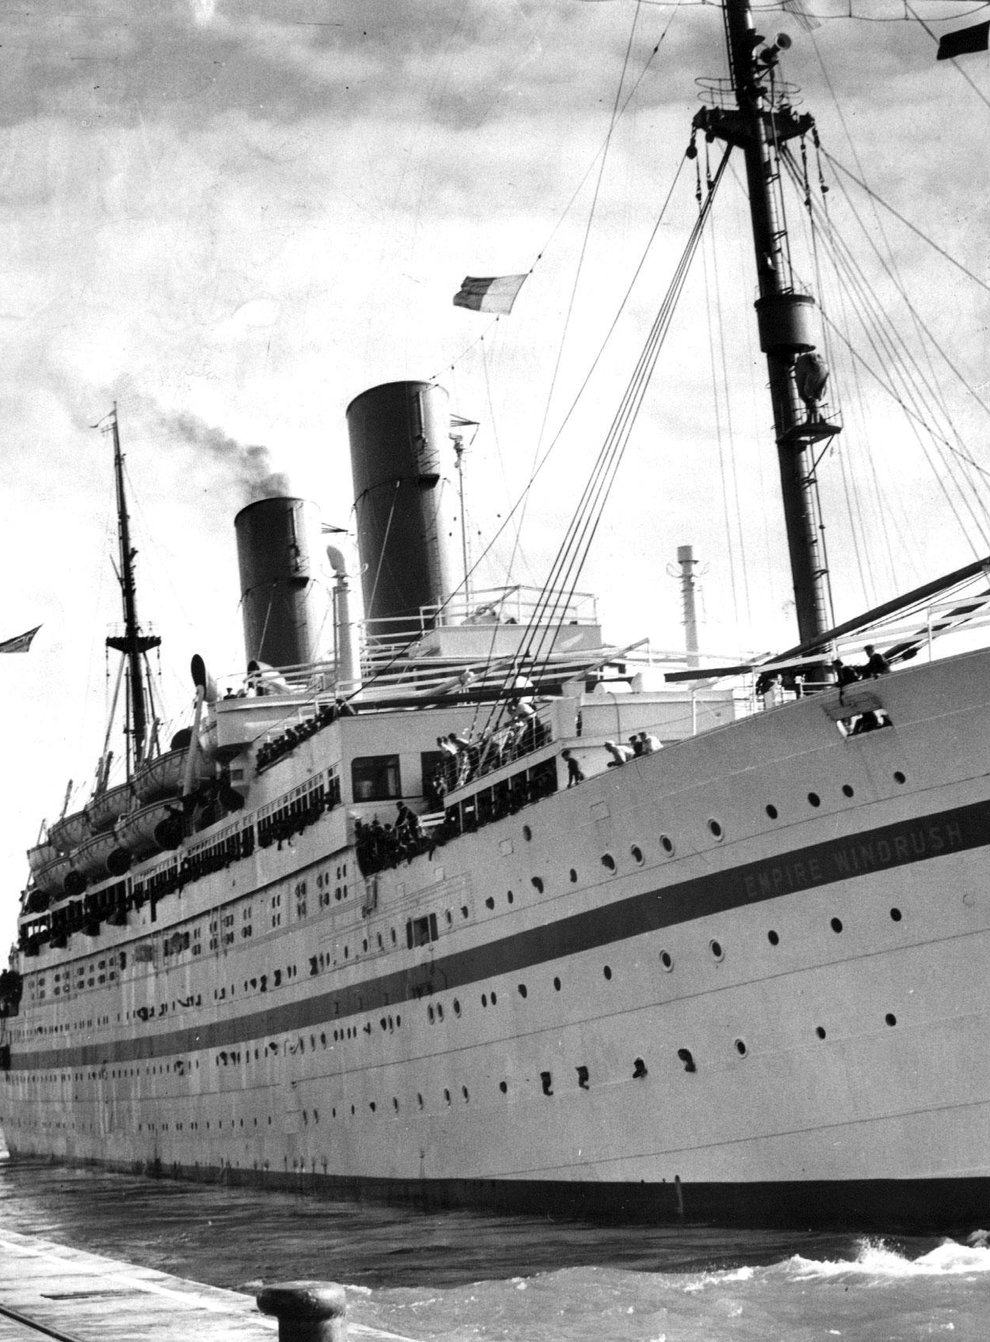 The Empire Windrush. The Home Secretary has promised a full review of the hostile environment policy in light of the scandal 